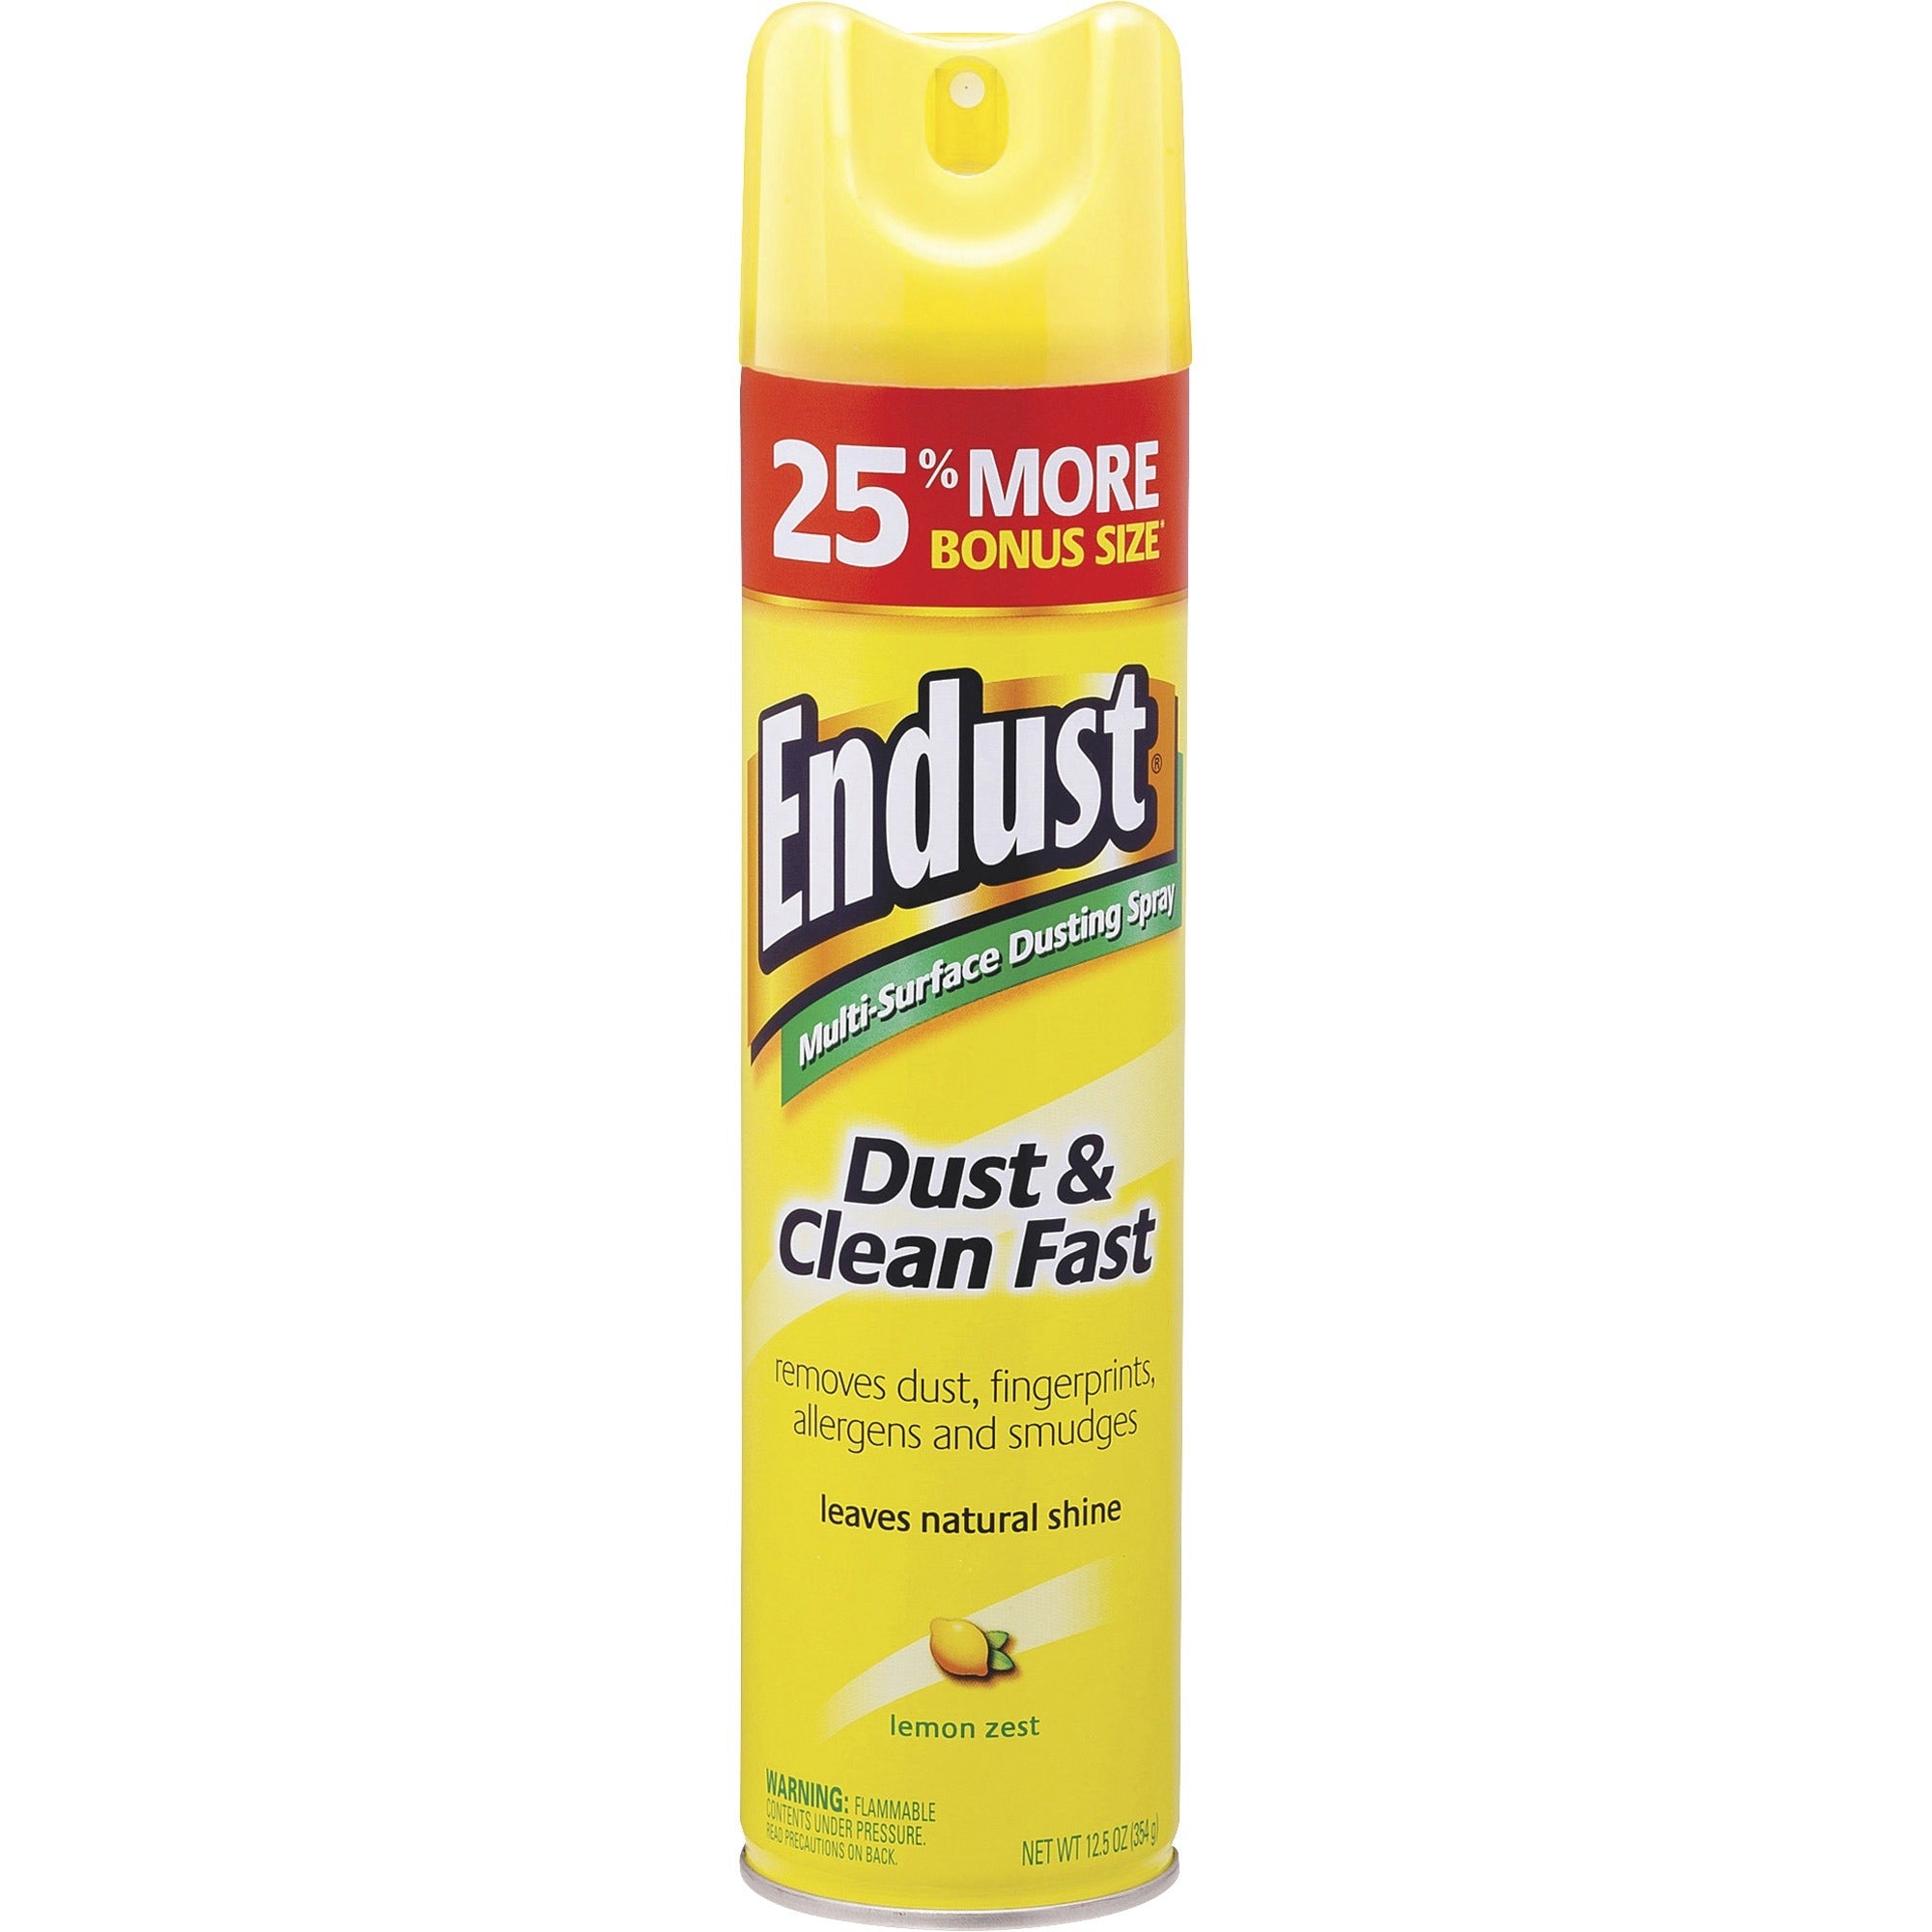 diversey-endust-lemon-dust-&-clean-spray-ready-to-use-1250-oz-078-lb-lemon-zest-scent-6-carton-hypoallergenic-fragrance-free-fast-acting-silicon-free-easy-to-use-residue-free-clear_dvocb508171ct - 2